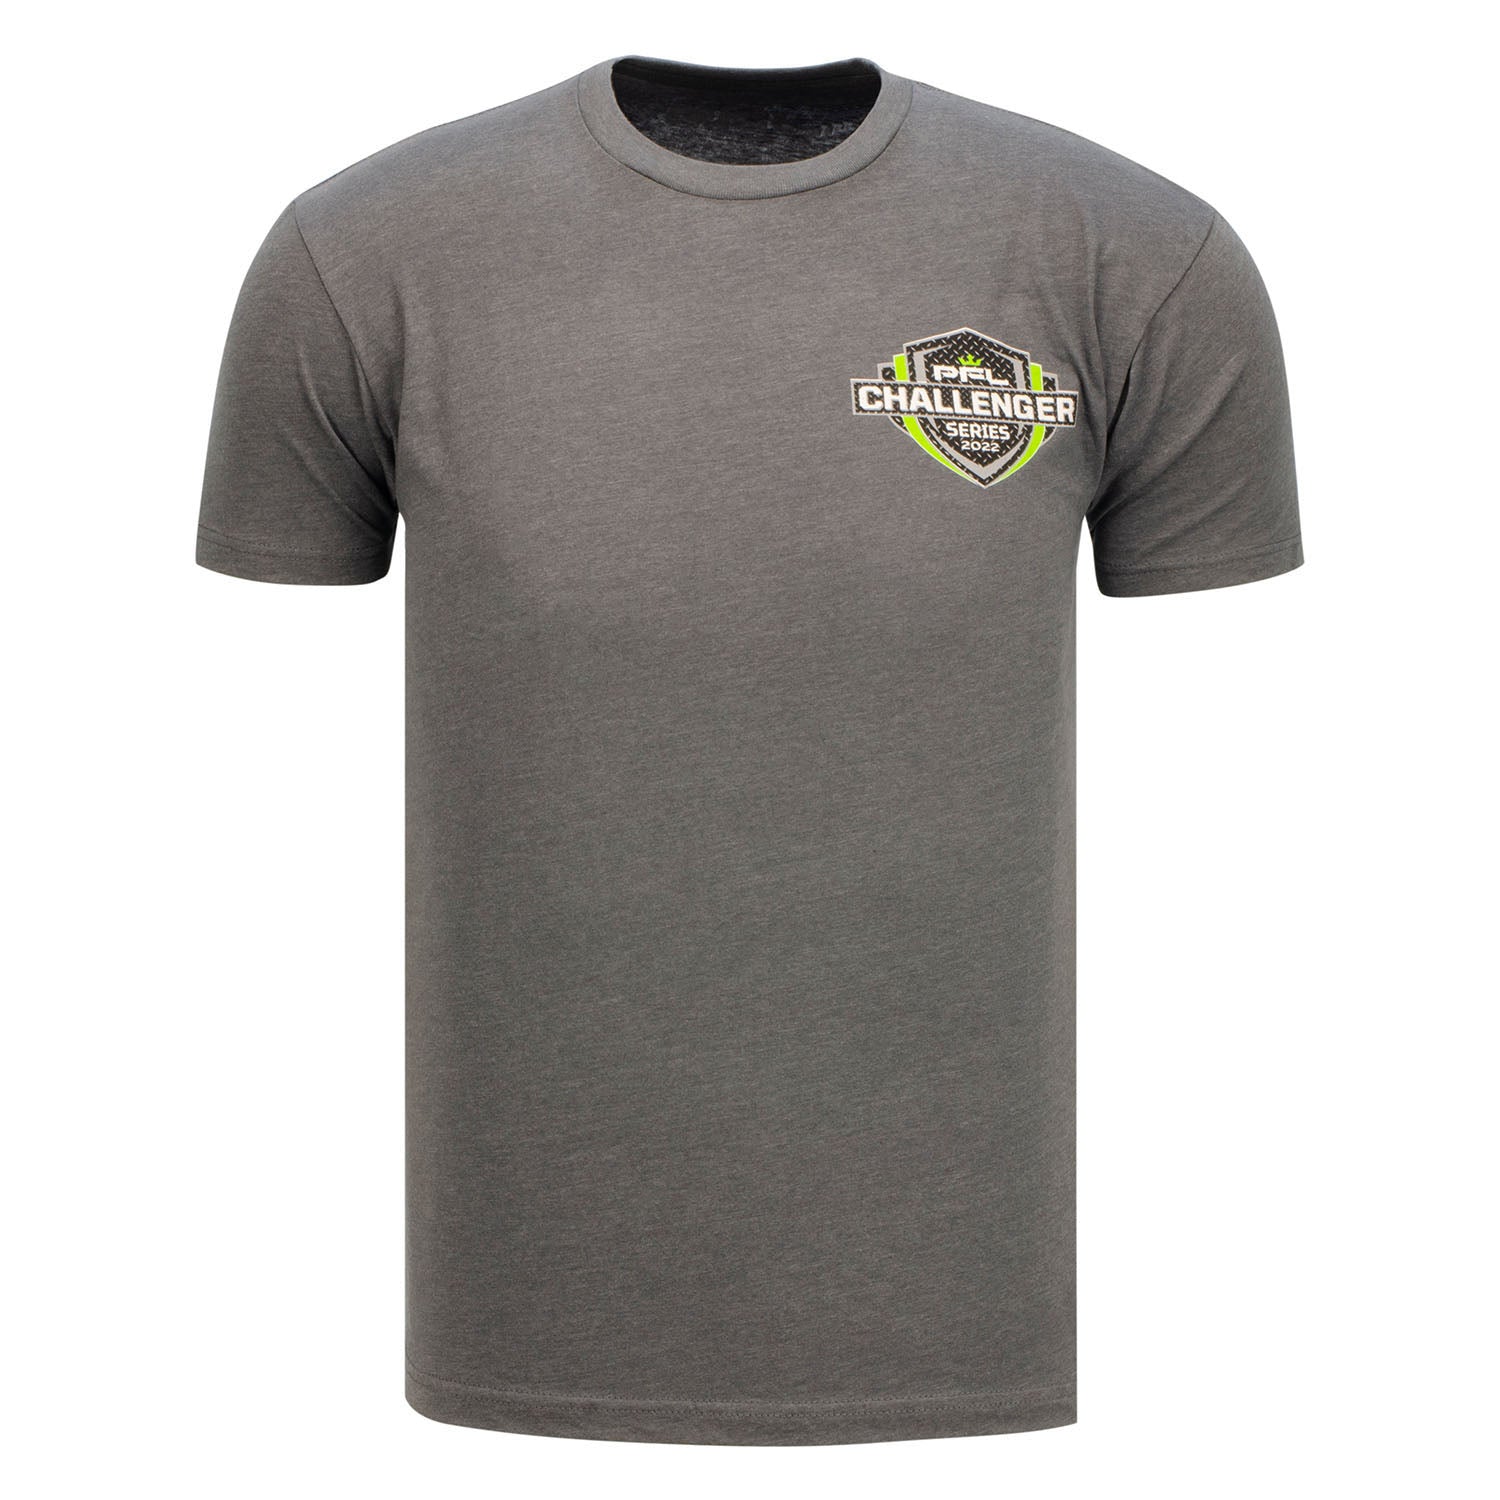 Challenger Series Come Up T-Shirt in Grey - Back View